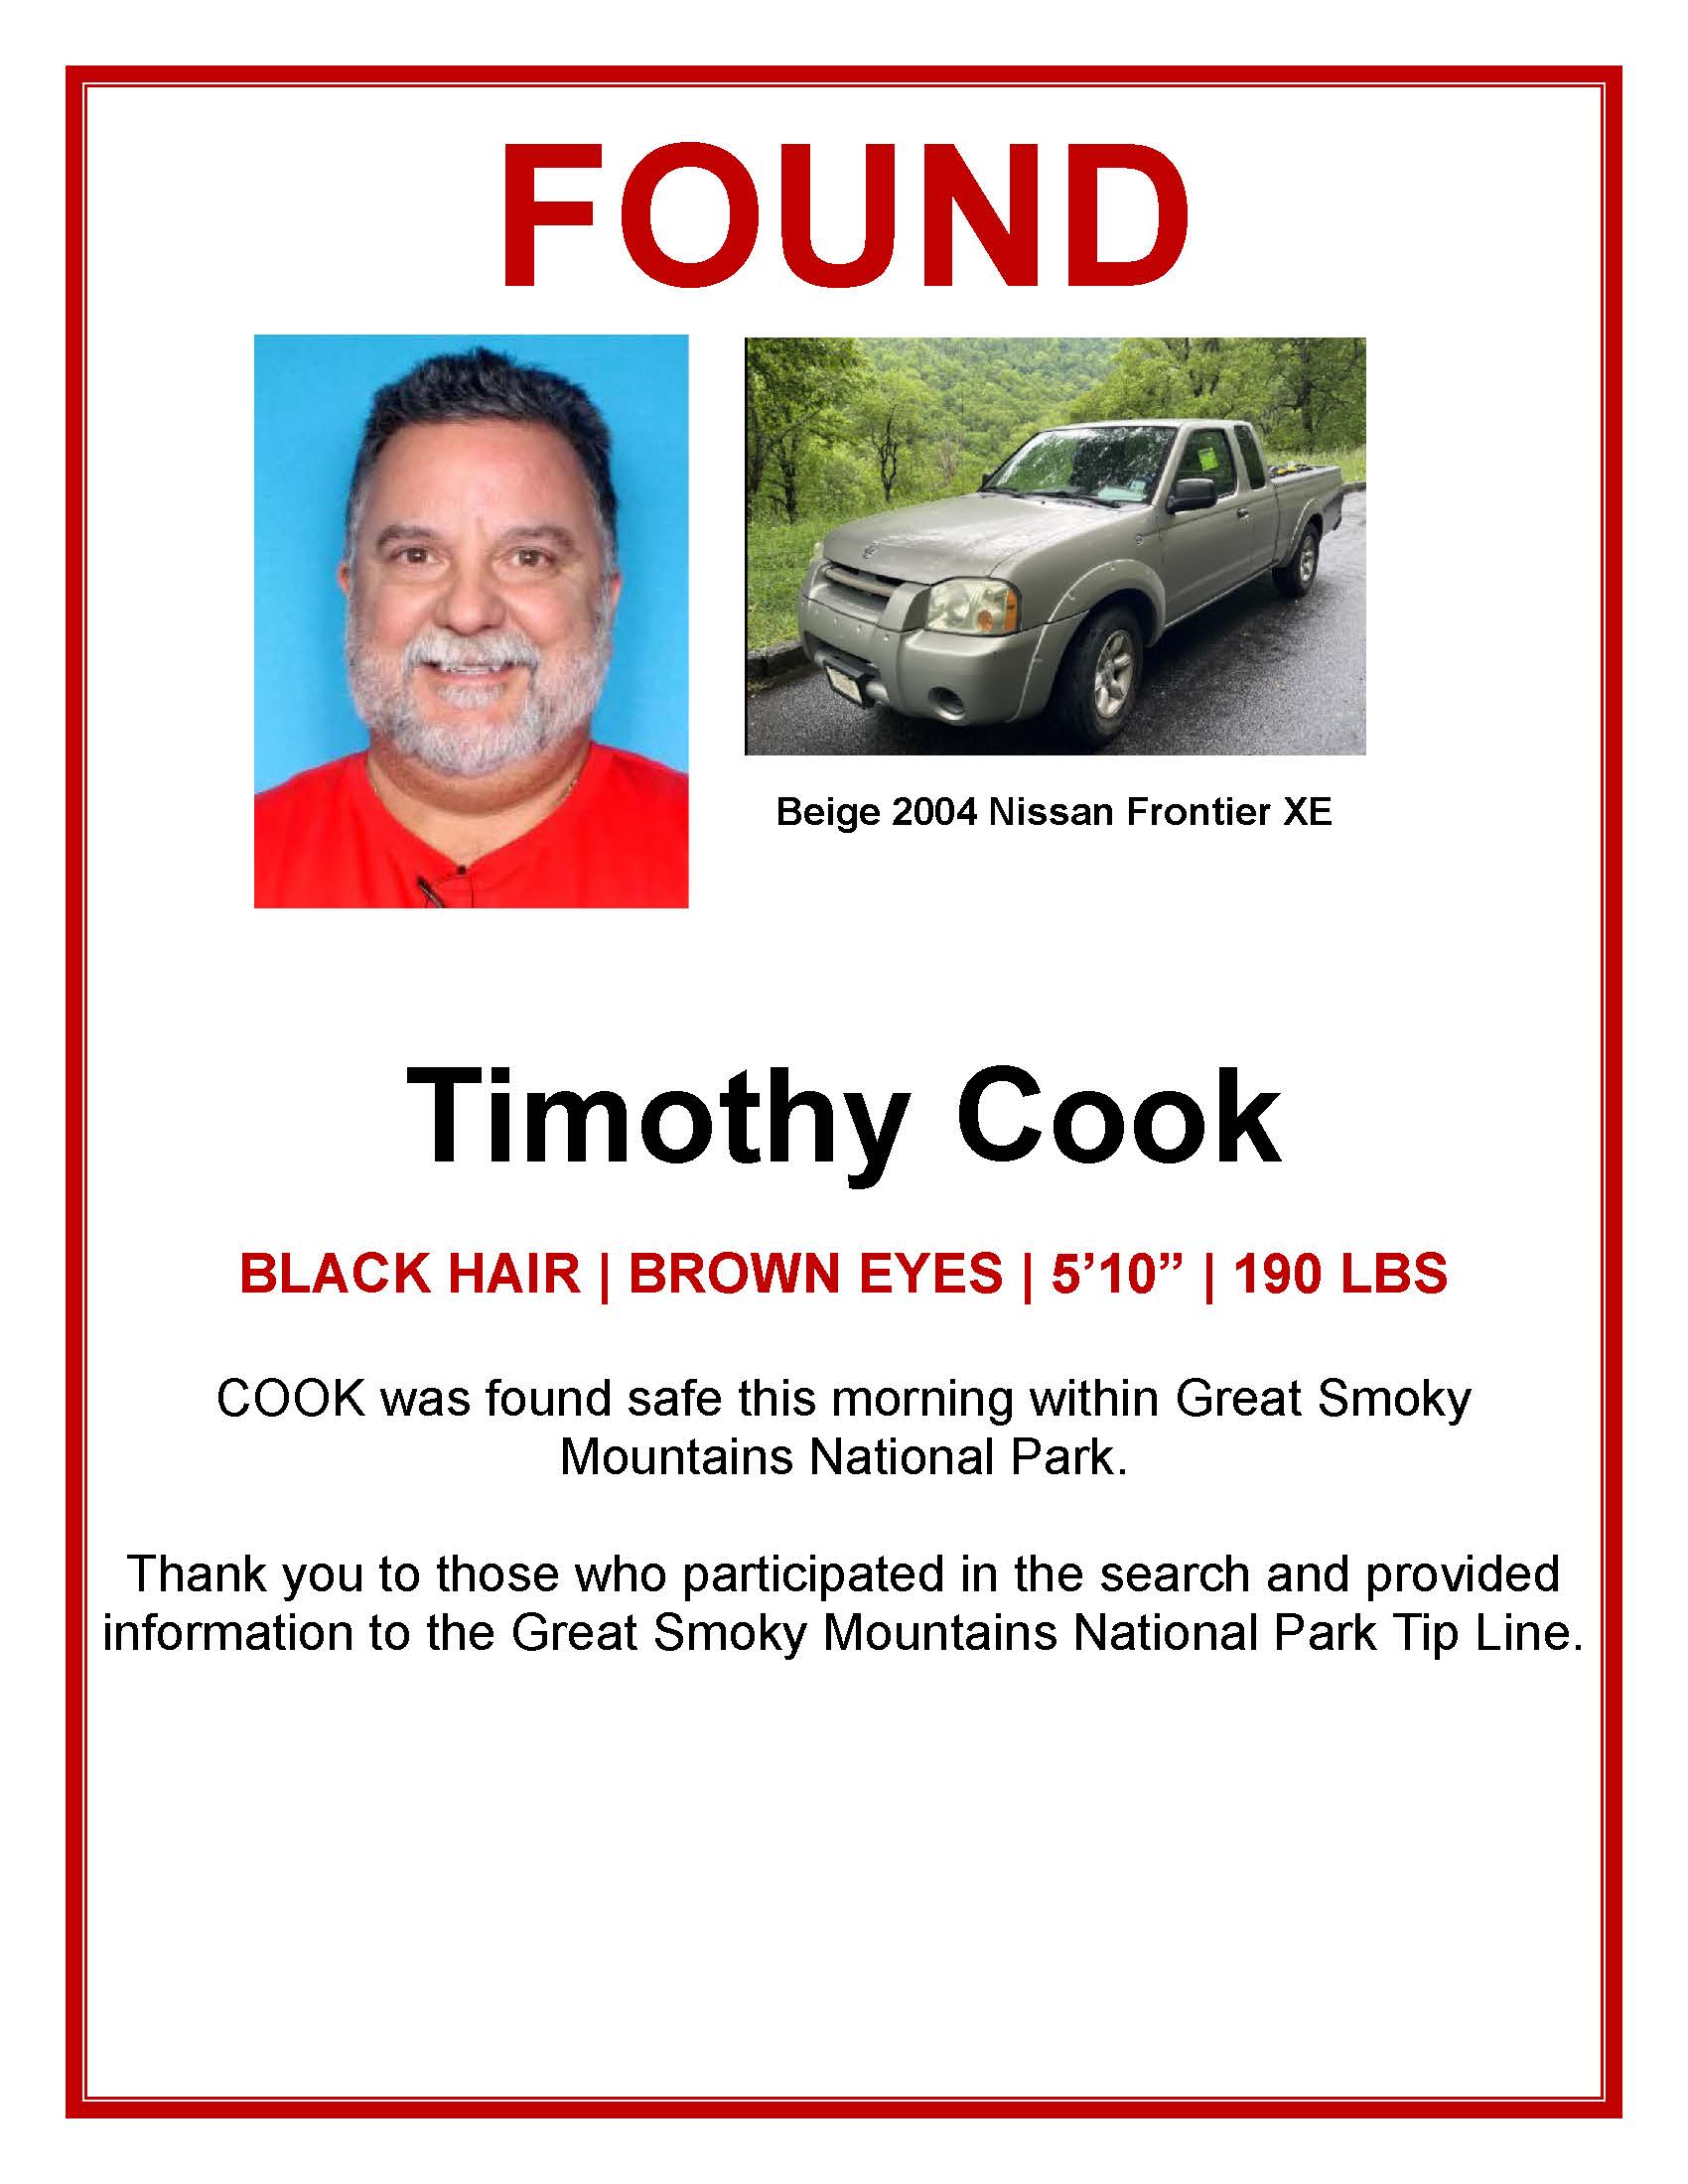 "Found" in red, capital text above a photo of a white man with black hair and a white beard beside a photo of his beige 2004 Nissan Frontier XE truck. Additional text: "Cook was found safe this morning within Great Smoky Mountains National Park."